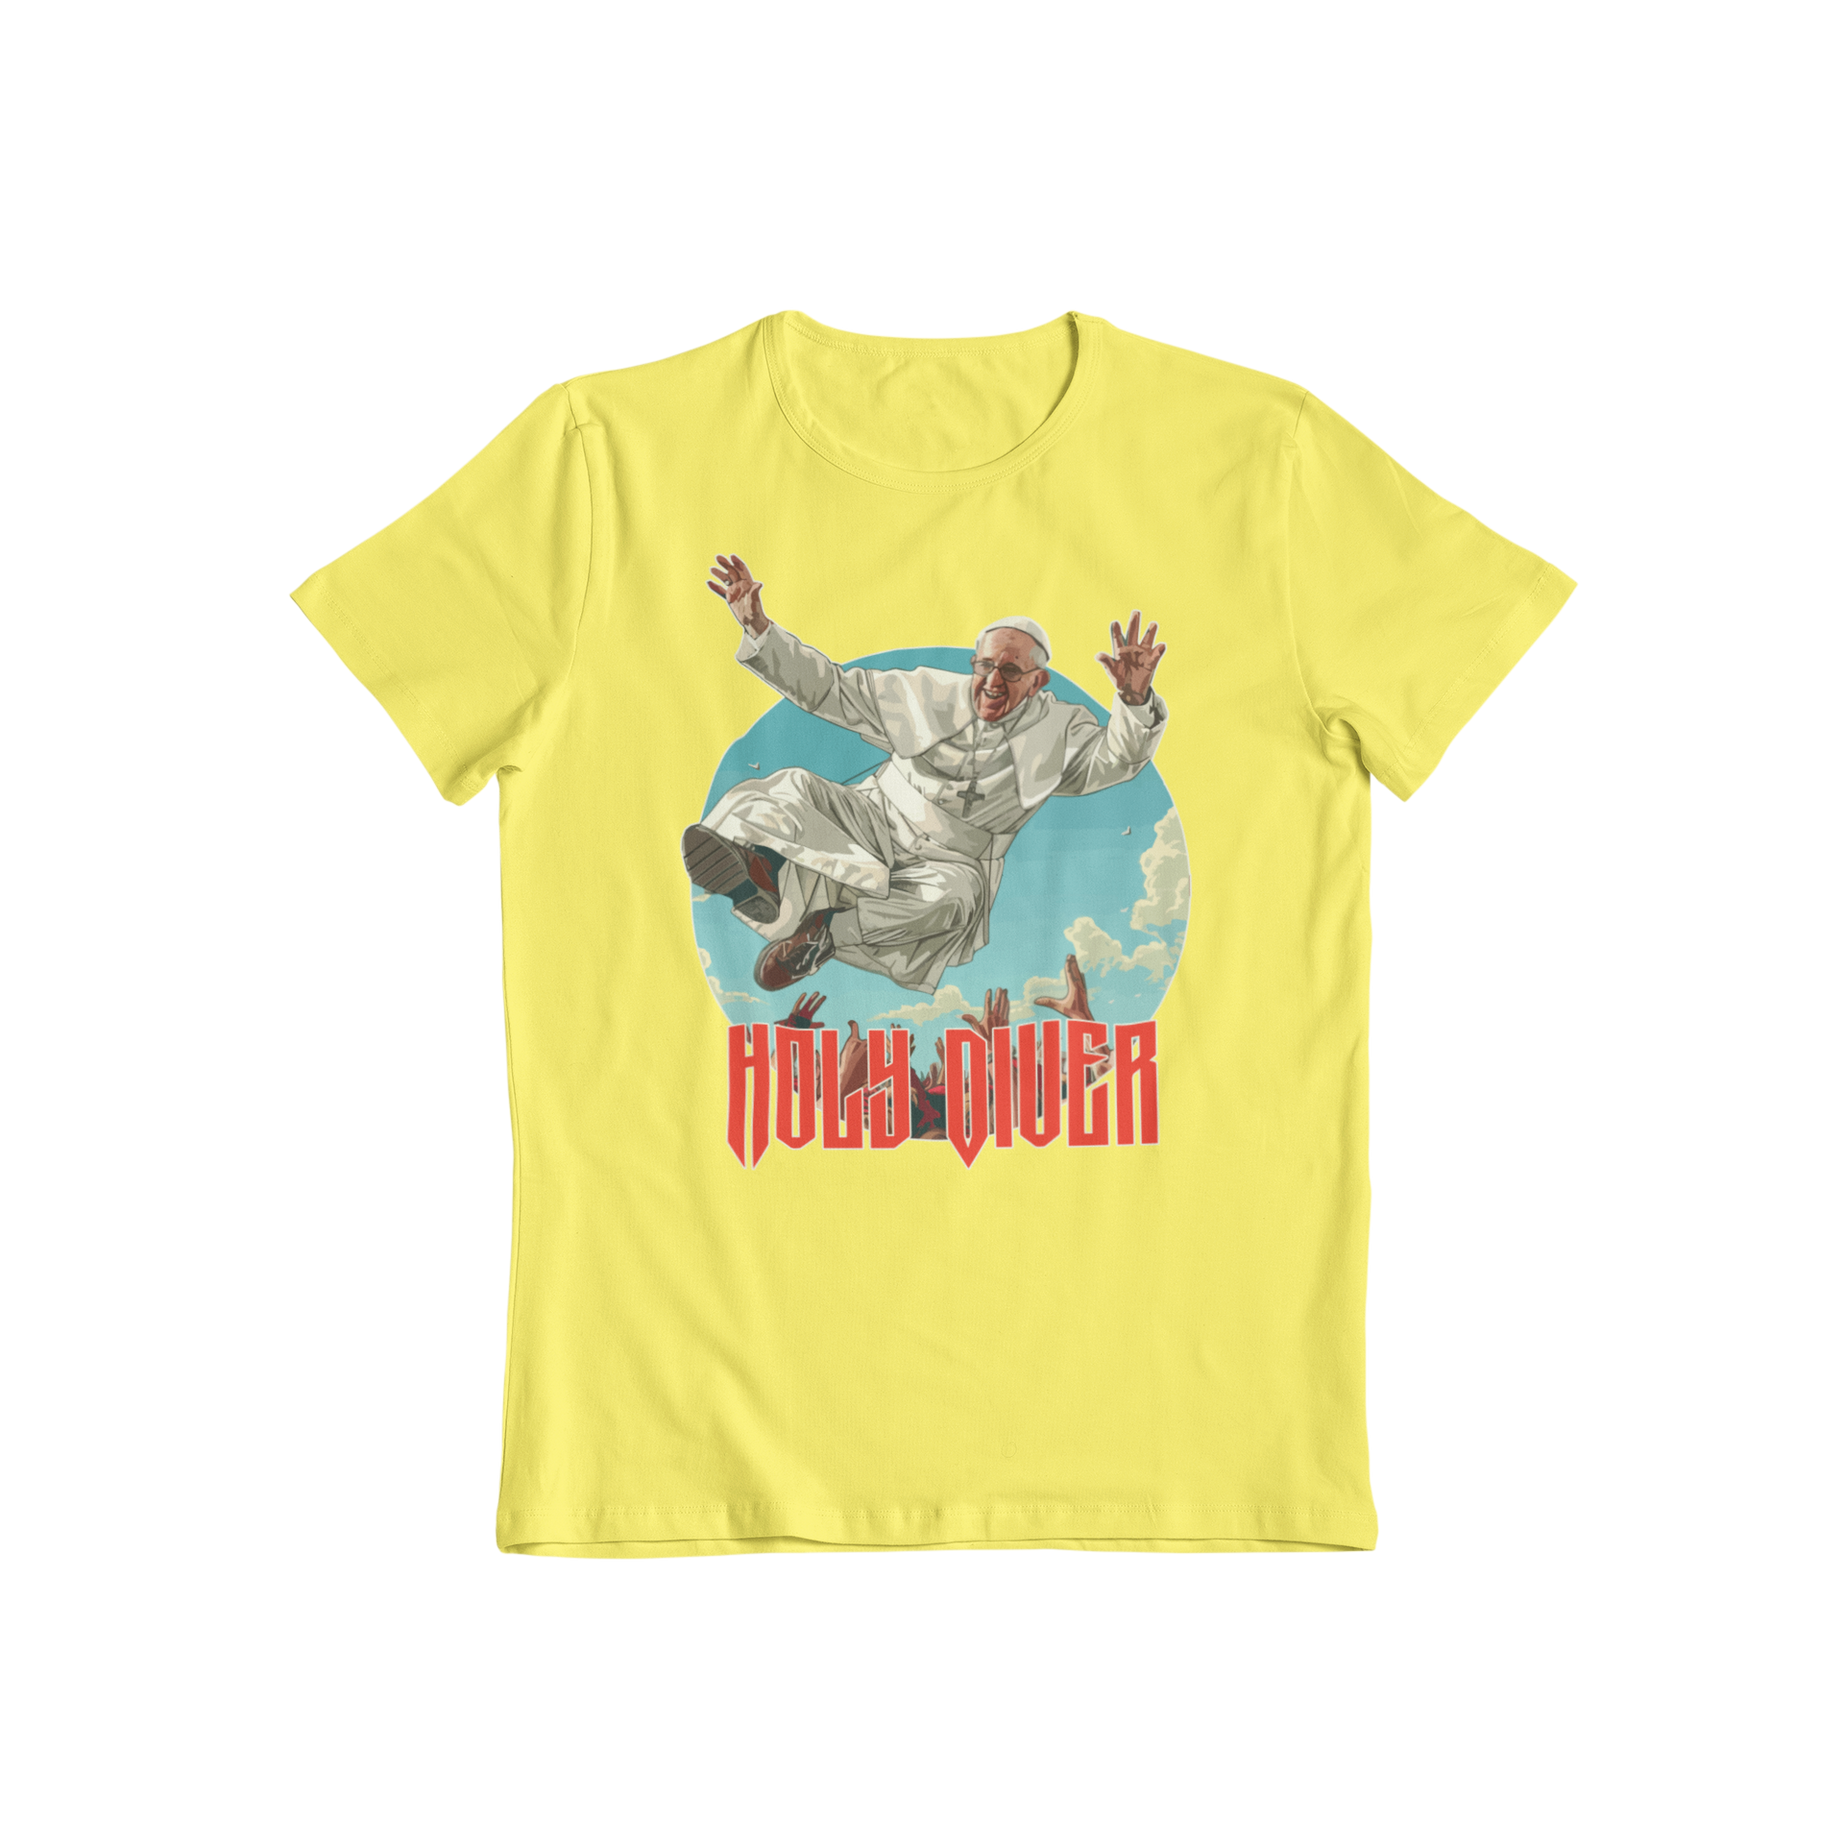 Join the ultimate holy mosh pit in our Holy Diver t-shirt! Featuring the pope crowd surfing (inspired by Dio's epic song), this classic graphic tee is perfect for expressing your love for both religion and rock. Show off your quirky side with this unique and playful shirt.